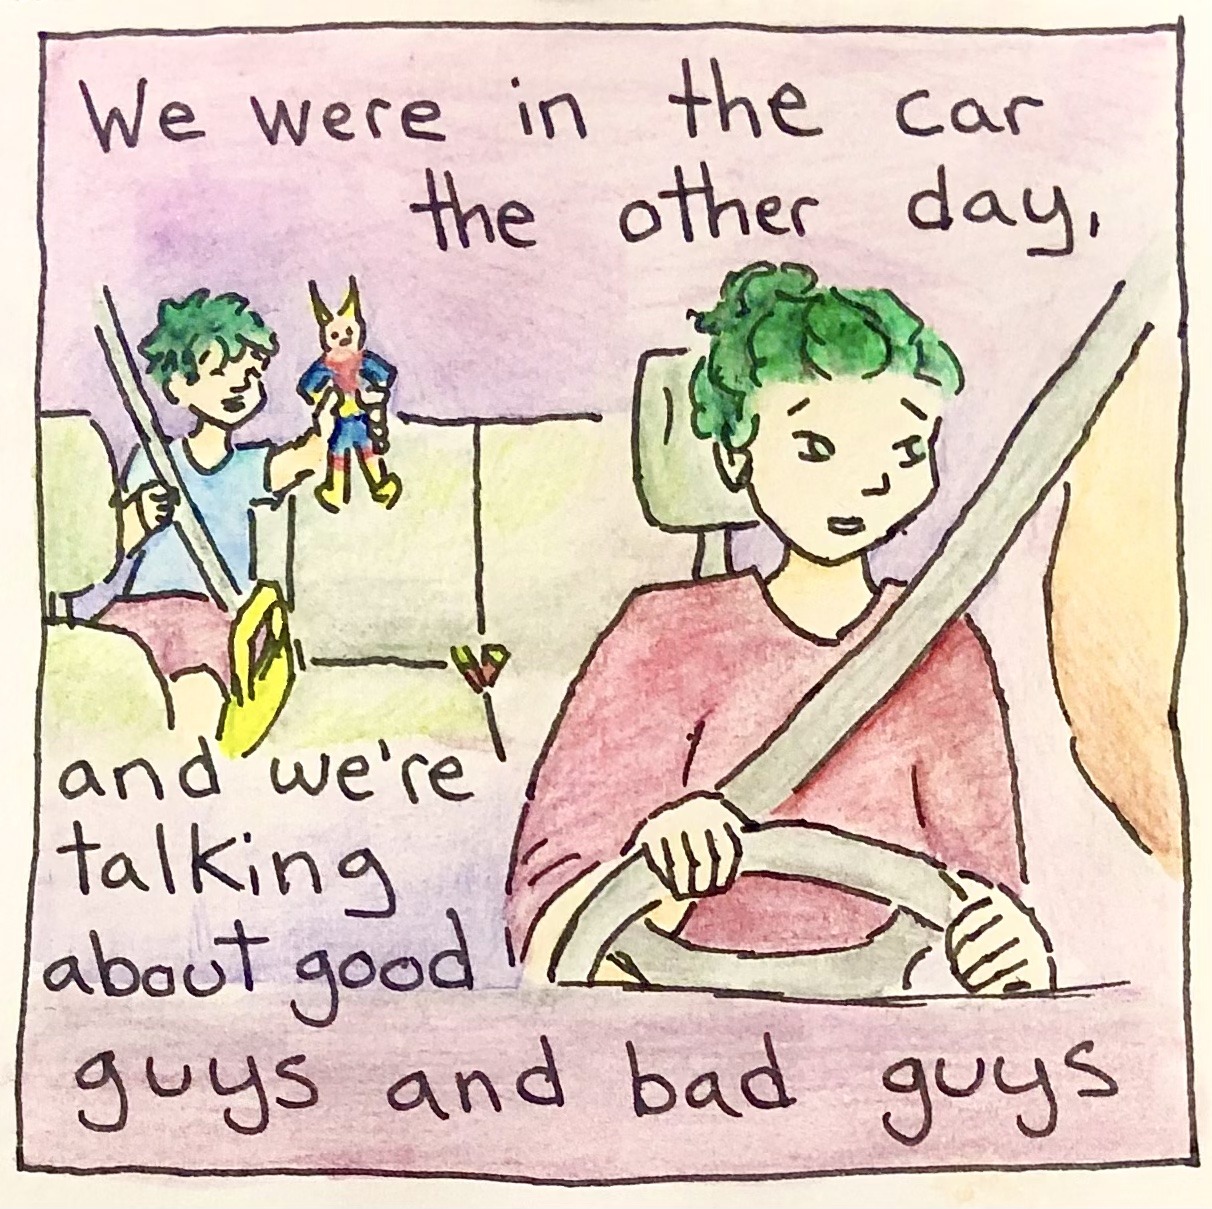 In this panel, the Midoriyas are in a car. Inko is driving in the foreground on the right. In the left background, Izuku sits in the backseat in a booster seat, holding up his All Might action figure. The text says, 'We were in the car the other day, and we're talking about good guys and bad guys'